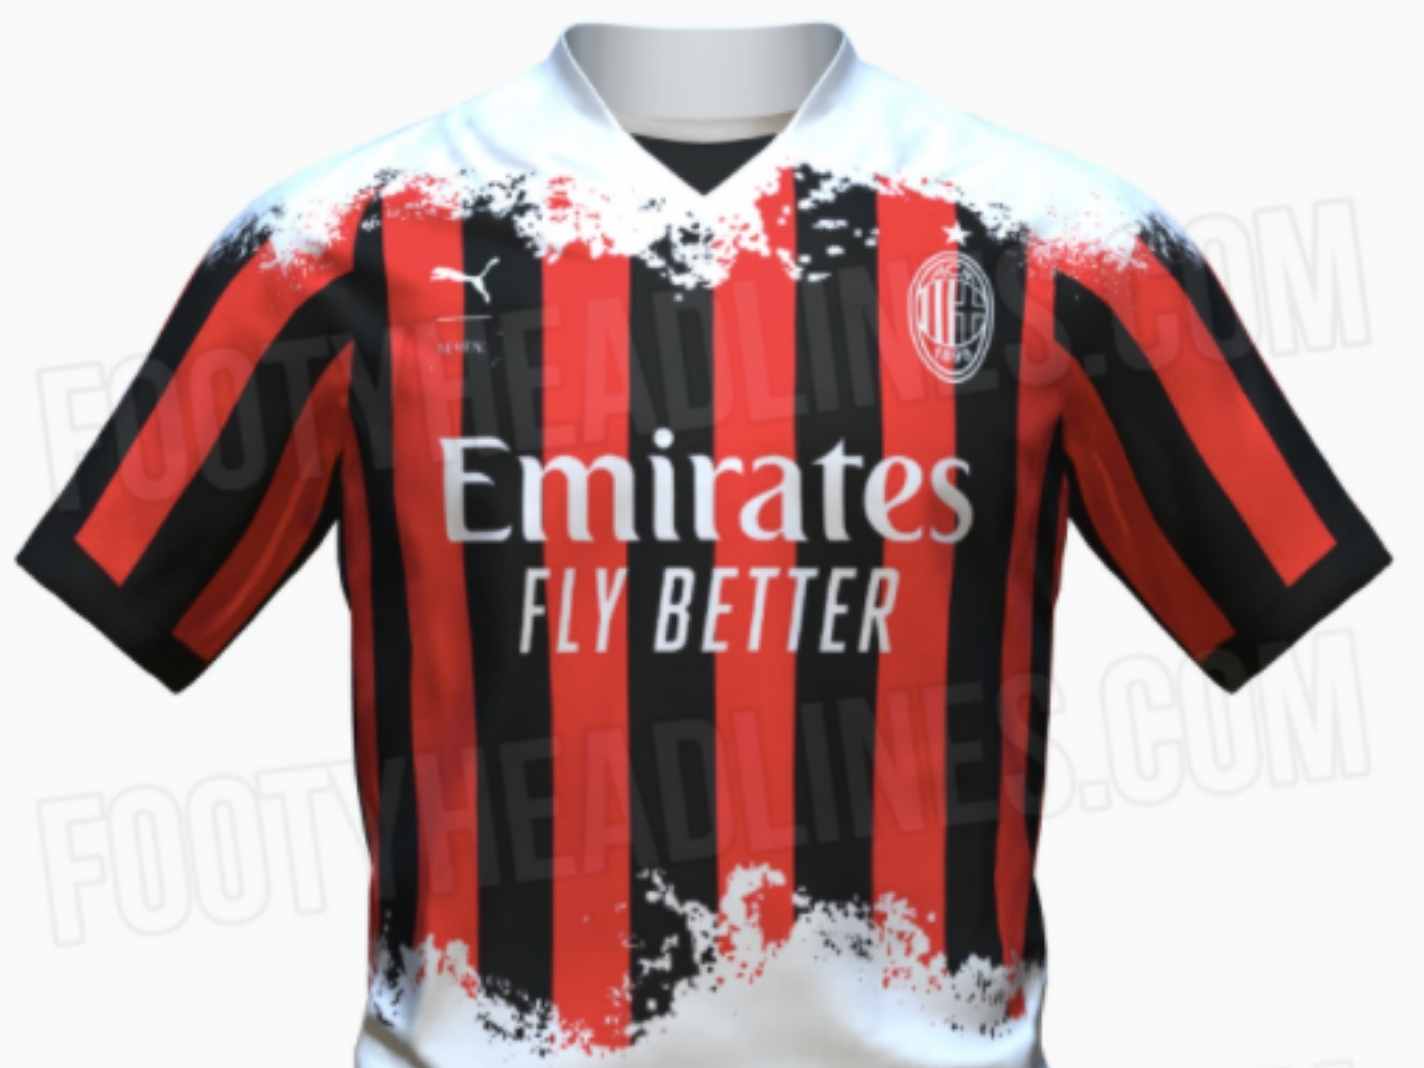 AC Milan set to release new fourth kit with not-so-subtle faded pattern